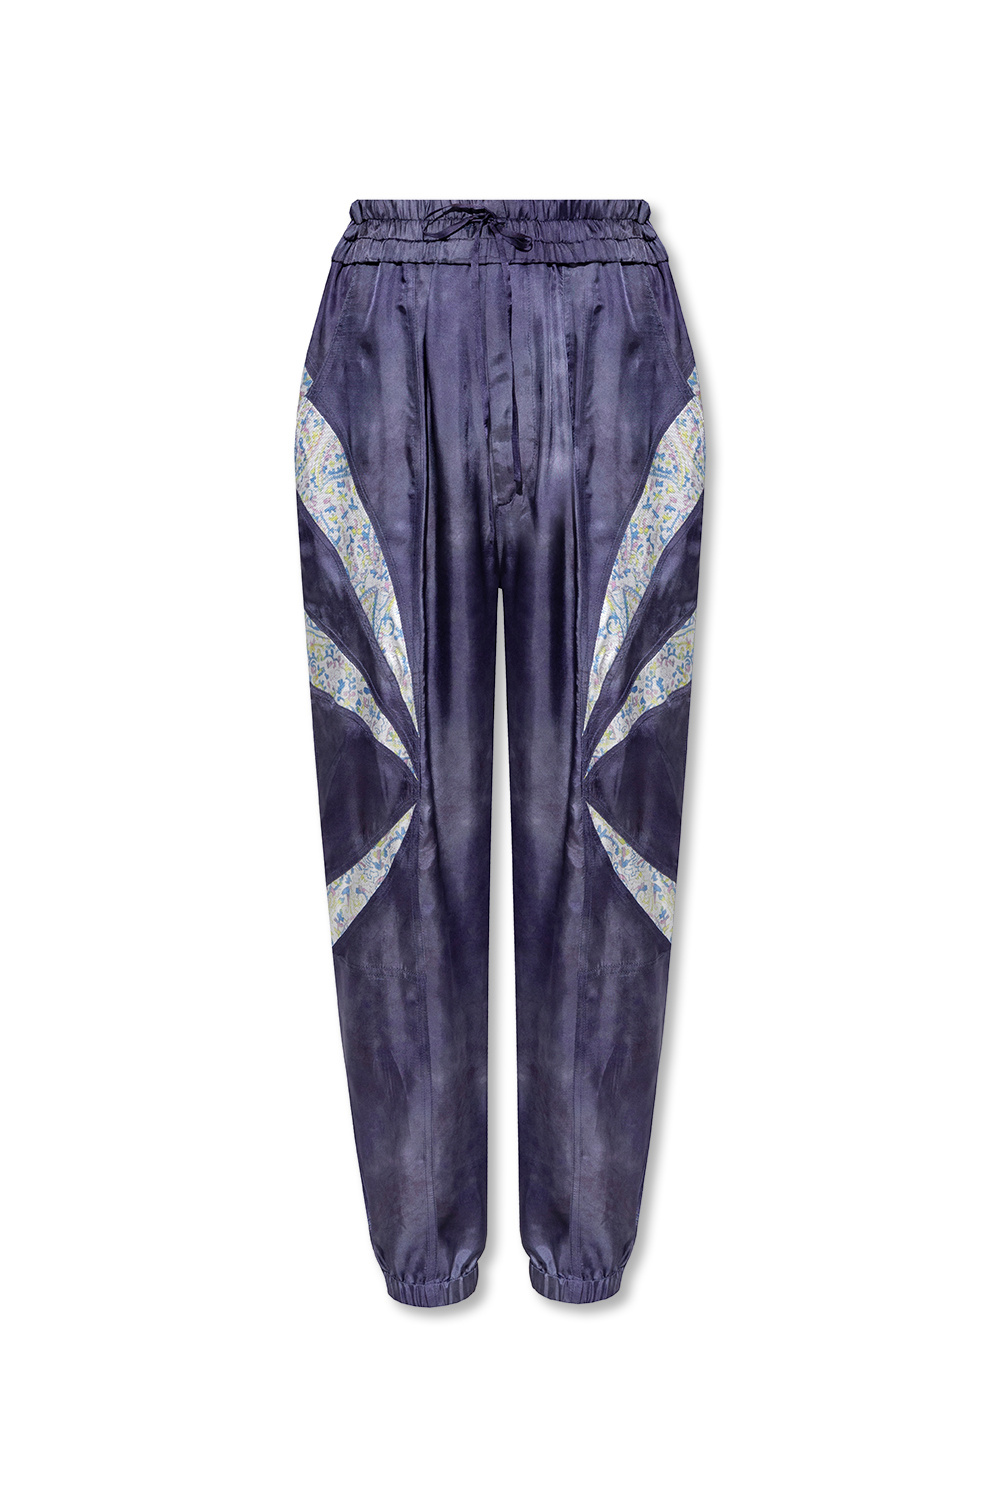 Isabel Marant ‘Brinley’ striped trousers